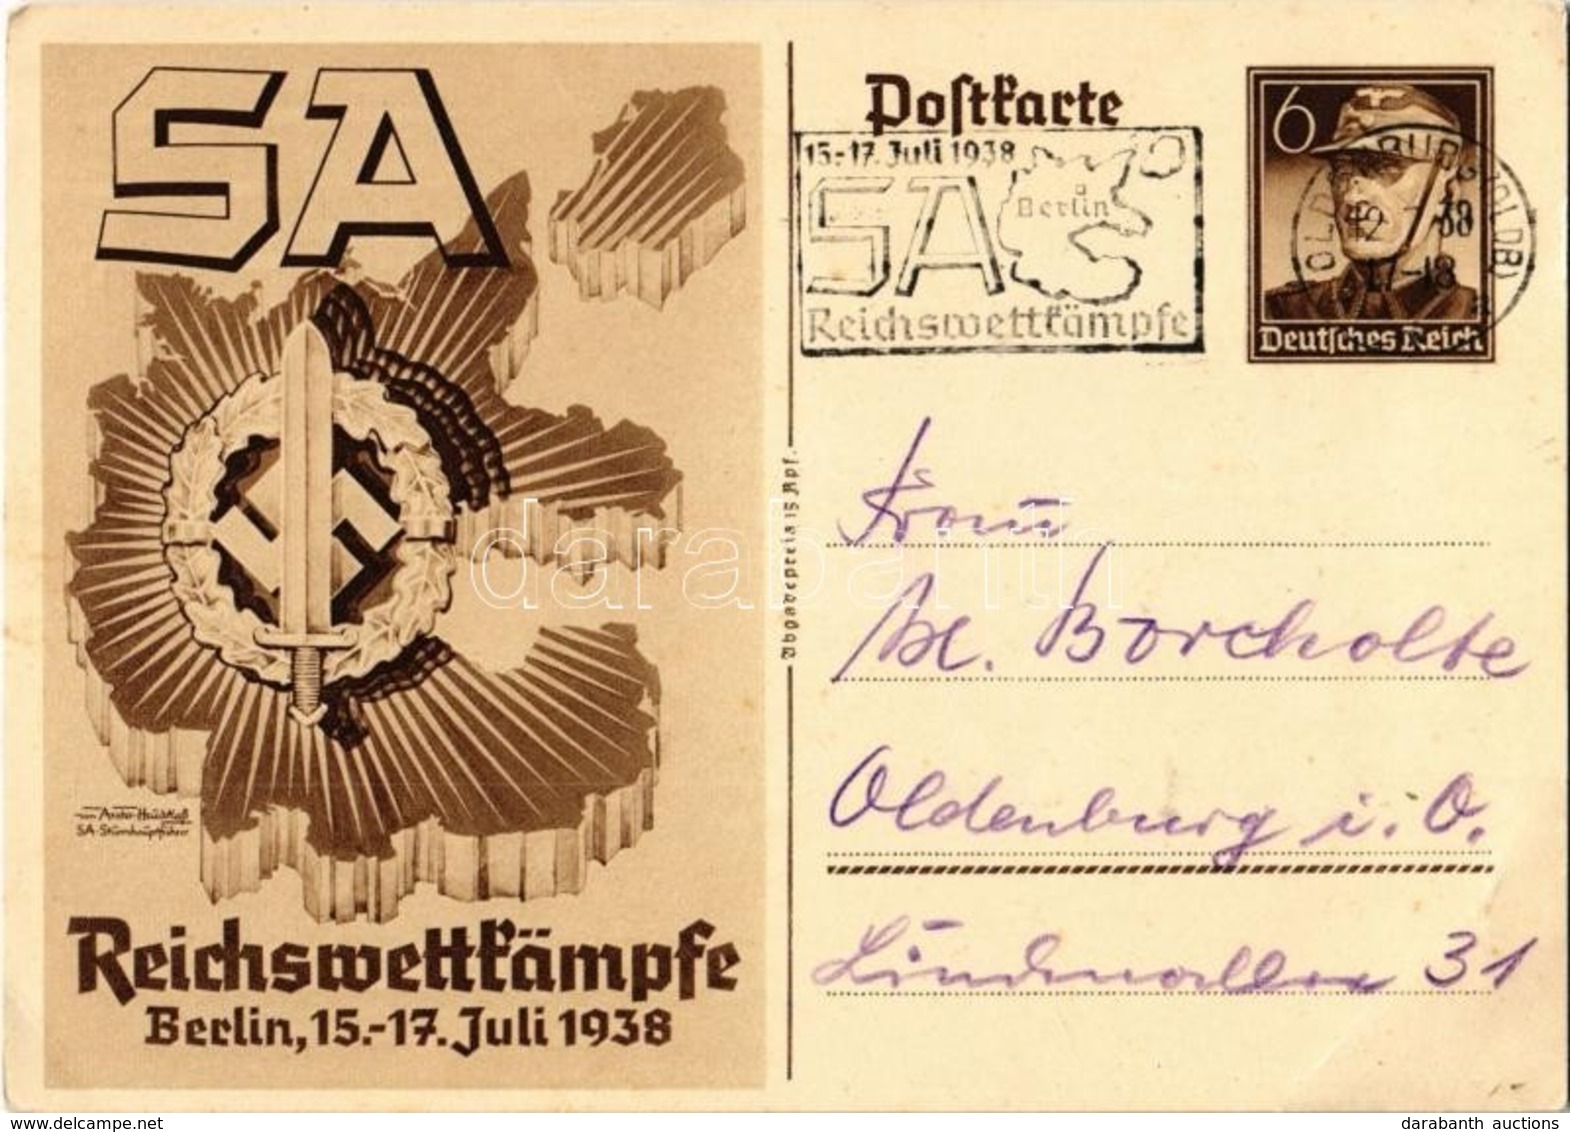 T2/T3 SA Reichswettkämpfe Berlin 15-17. Juli 1938 / Sturmabteilung Imperial Competition Games, NSDAP Nazi Party Propagan - Unclassified